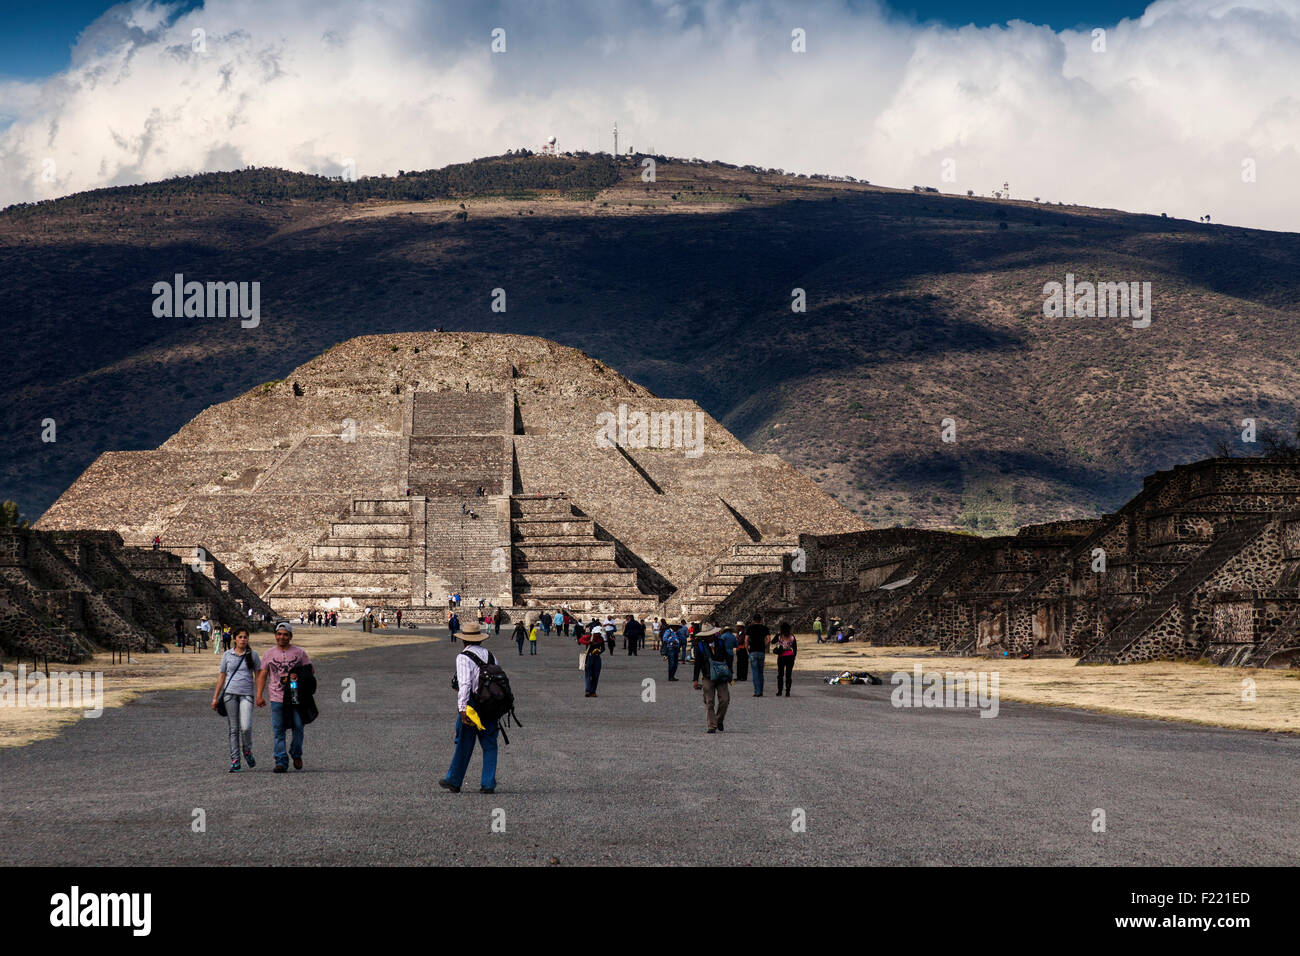 Pyramid of the Moon Teotihuacan archaeological site Unesco World ...